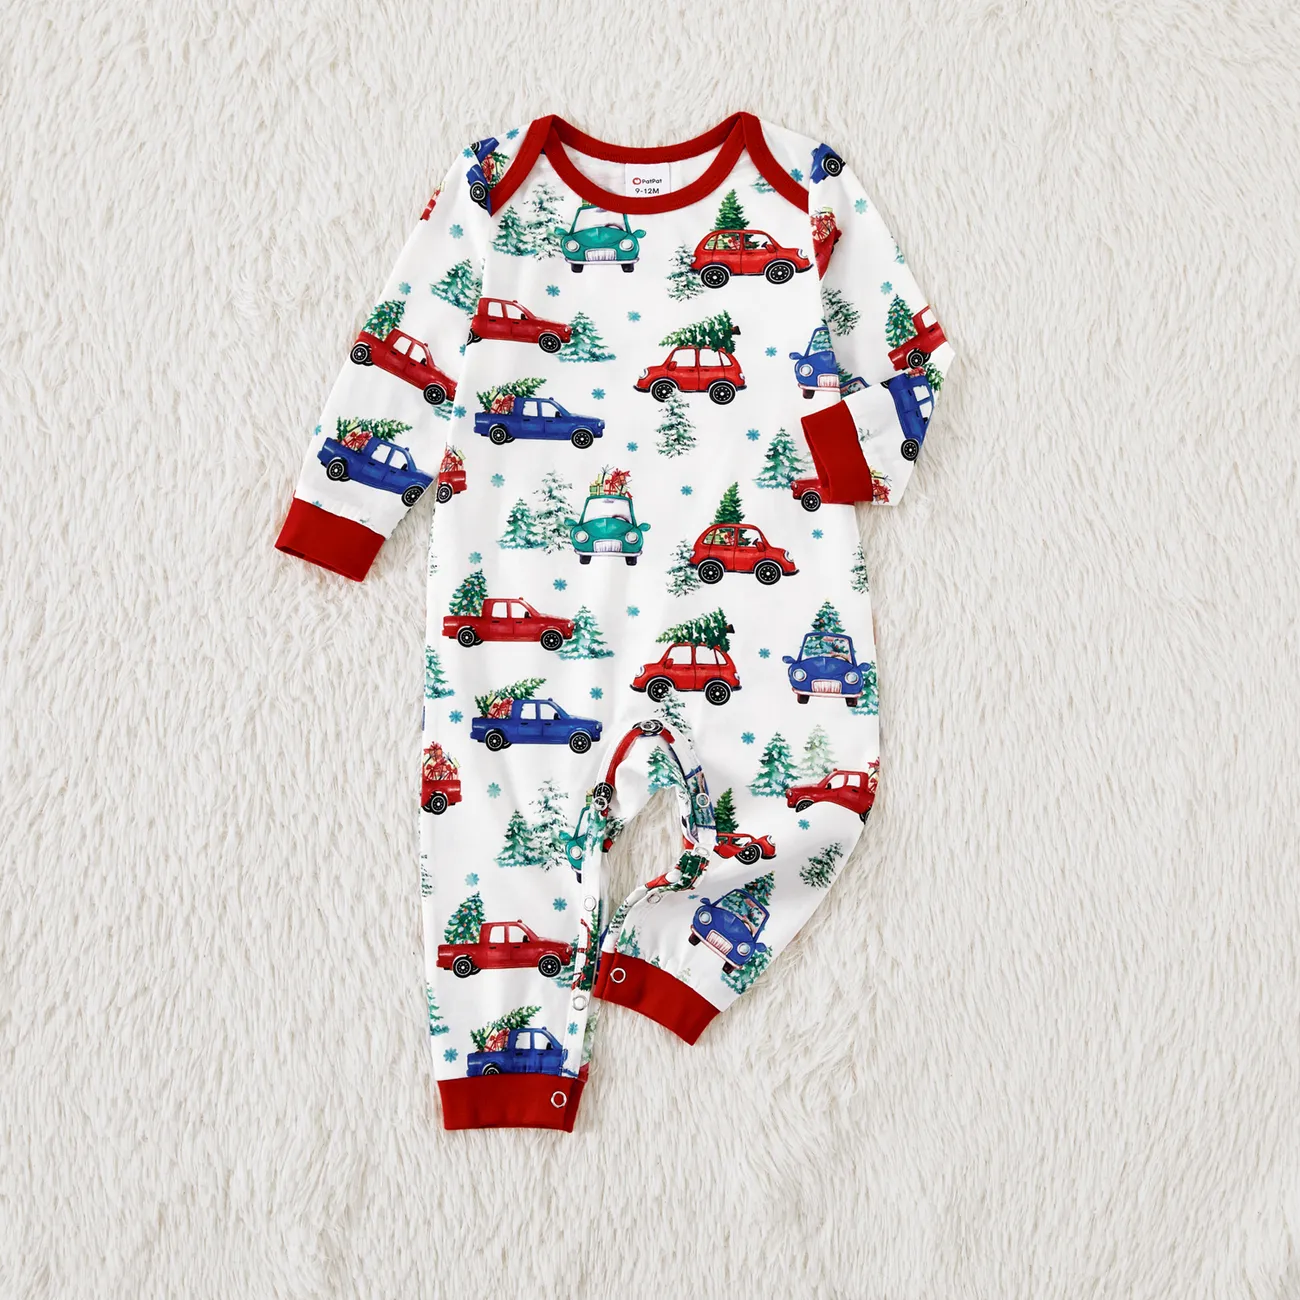 Christmas Allover red and Blue Car Print Family Matching Long-sleeve Pajamas Sets (Flame Resistant)  big image 1